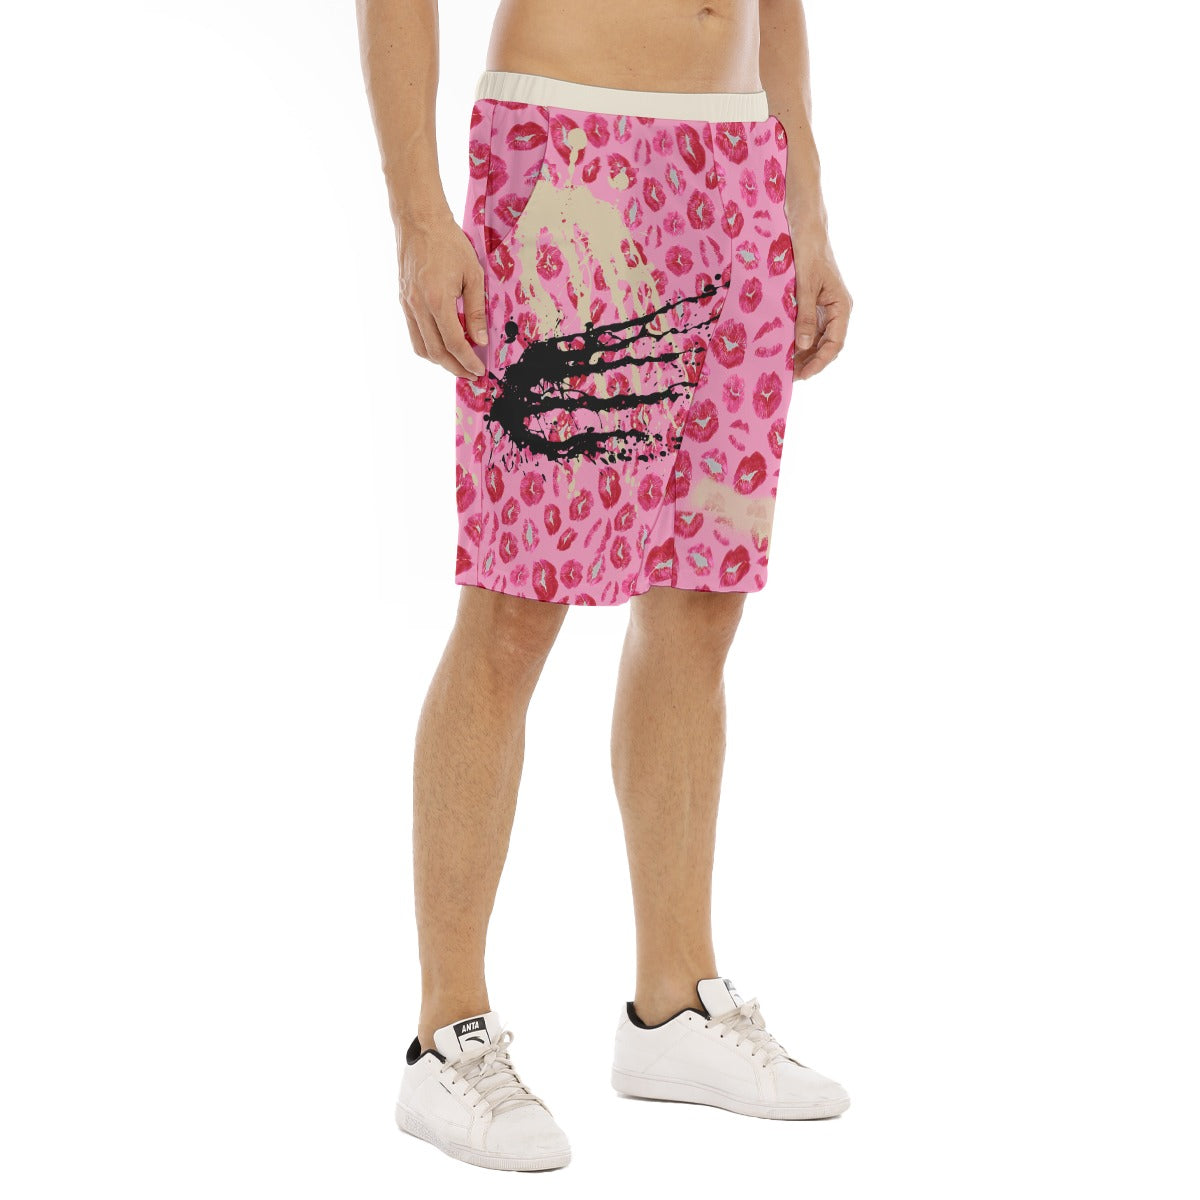 All-Over Print Men's Flat Shorts Yoycol